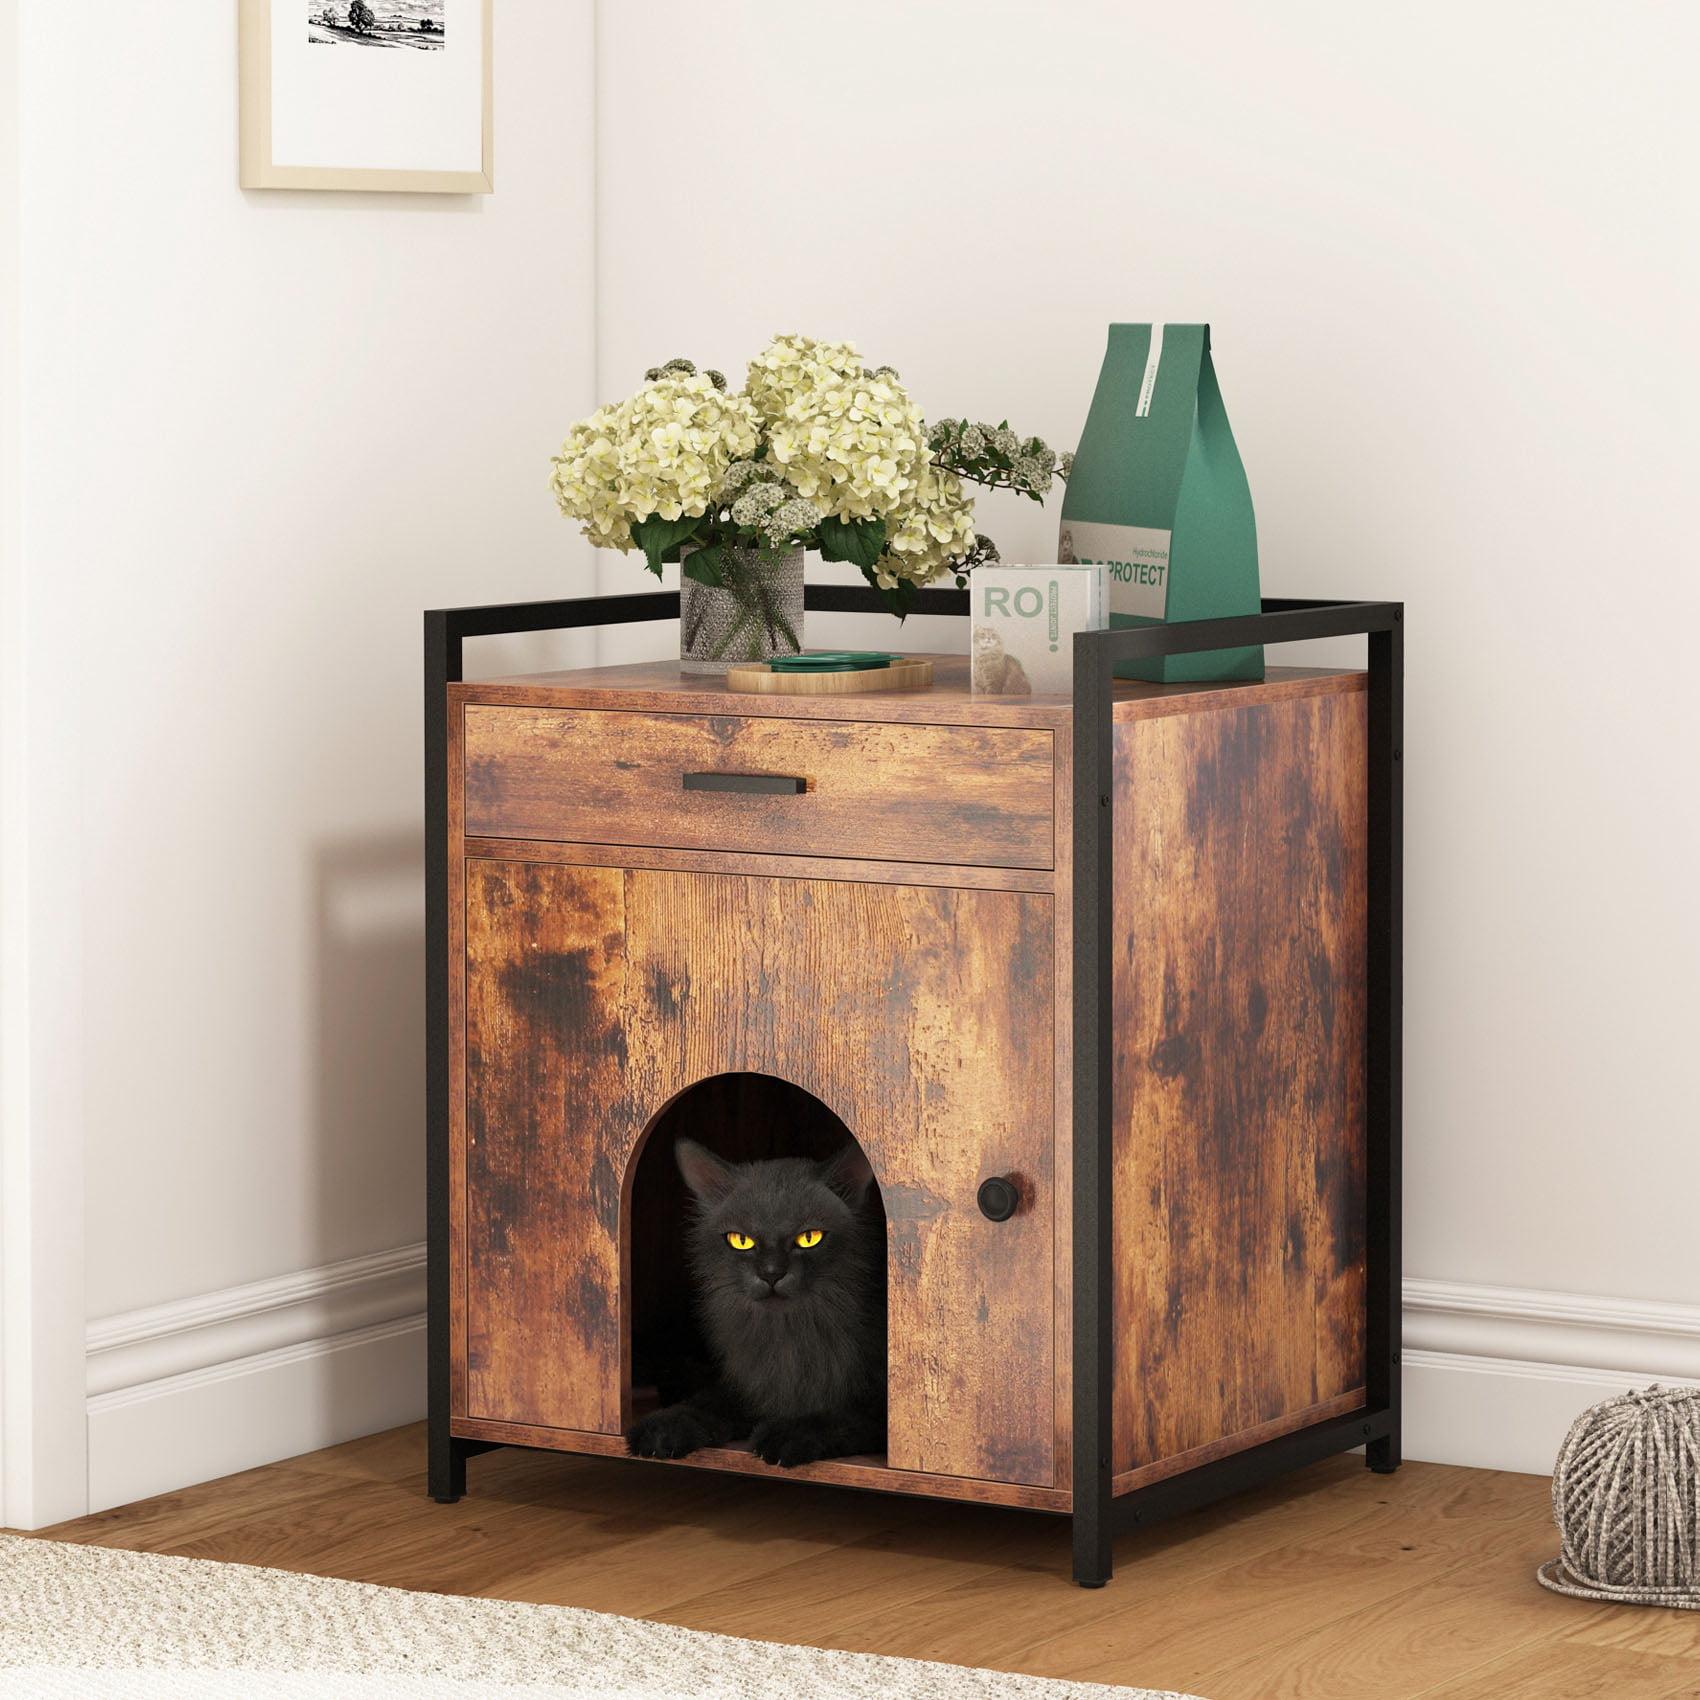 JVSISM Cat House and Litter Box, Rustic brown, 23.62" x21.22" x 27.87" Cat Nightstand